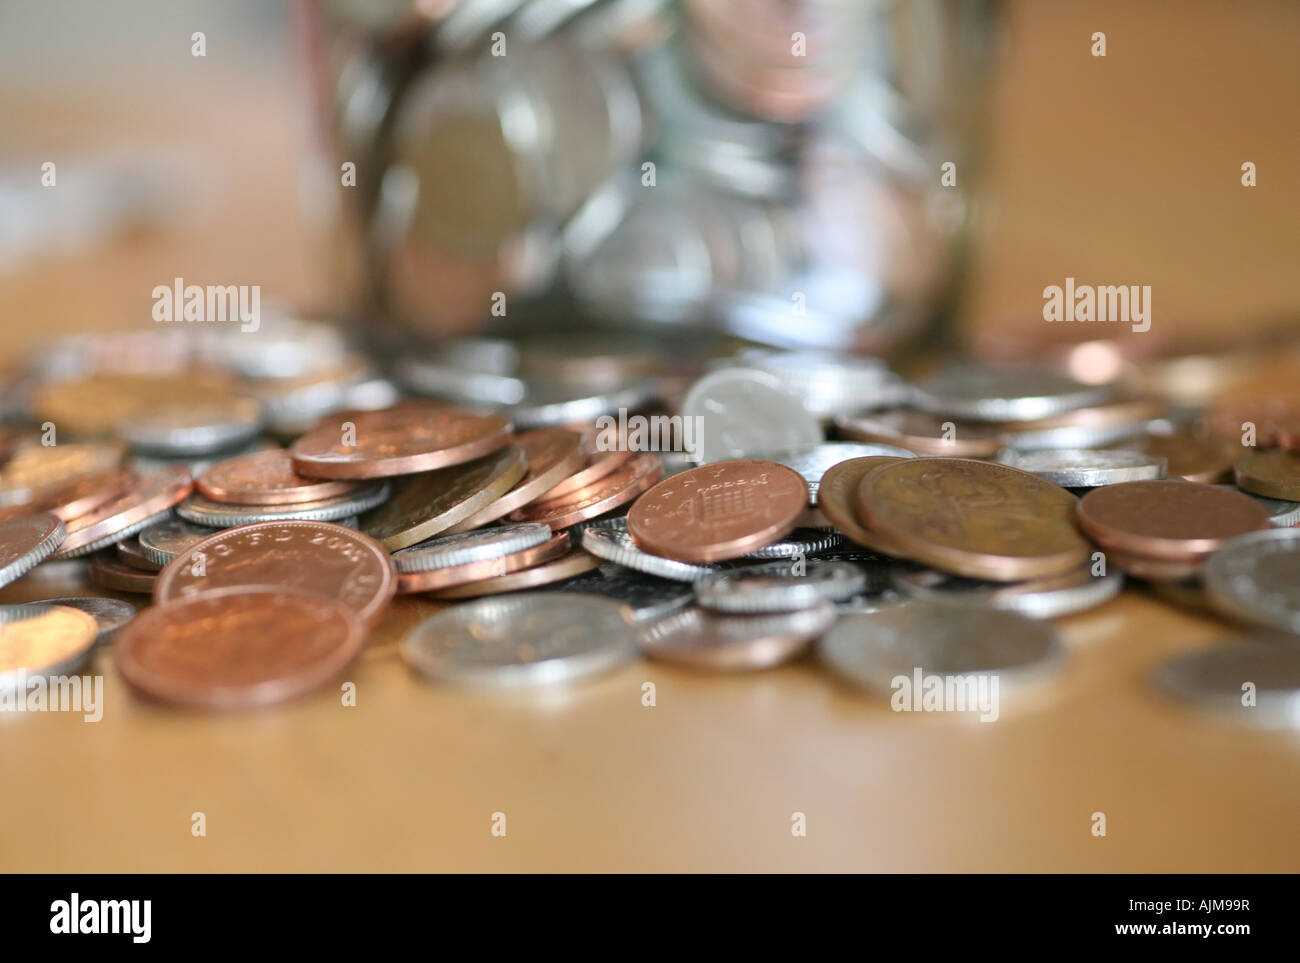 loose coins Stock Photo